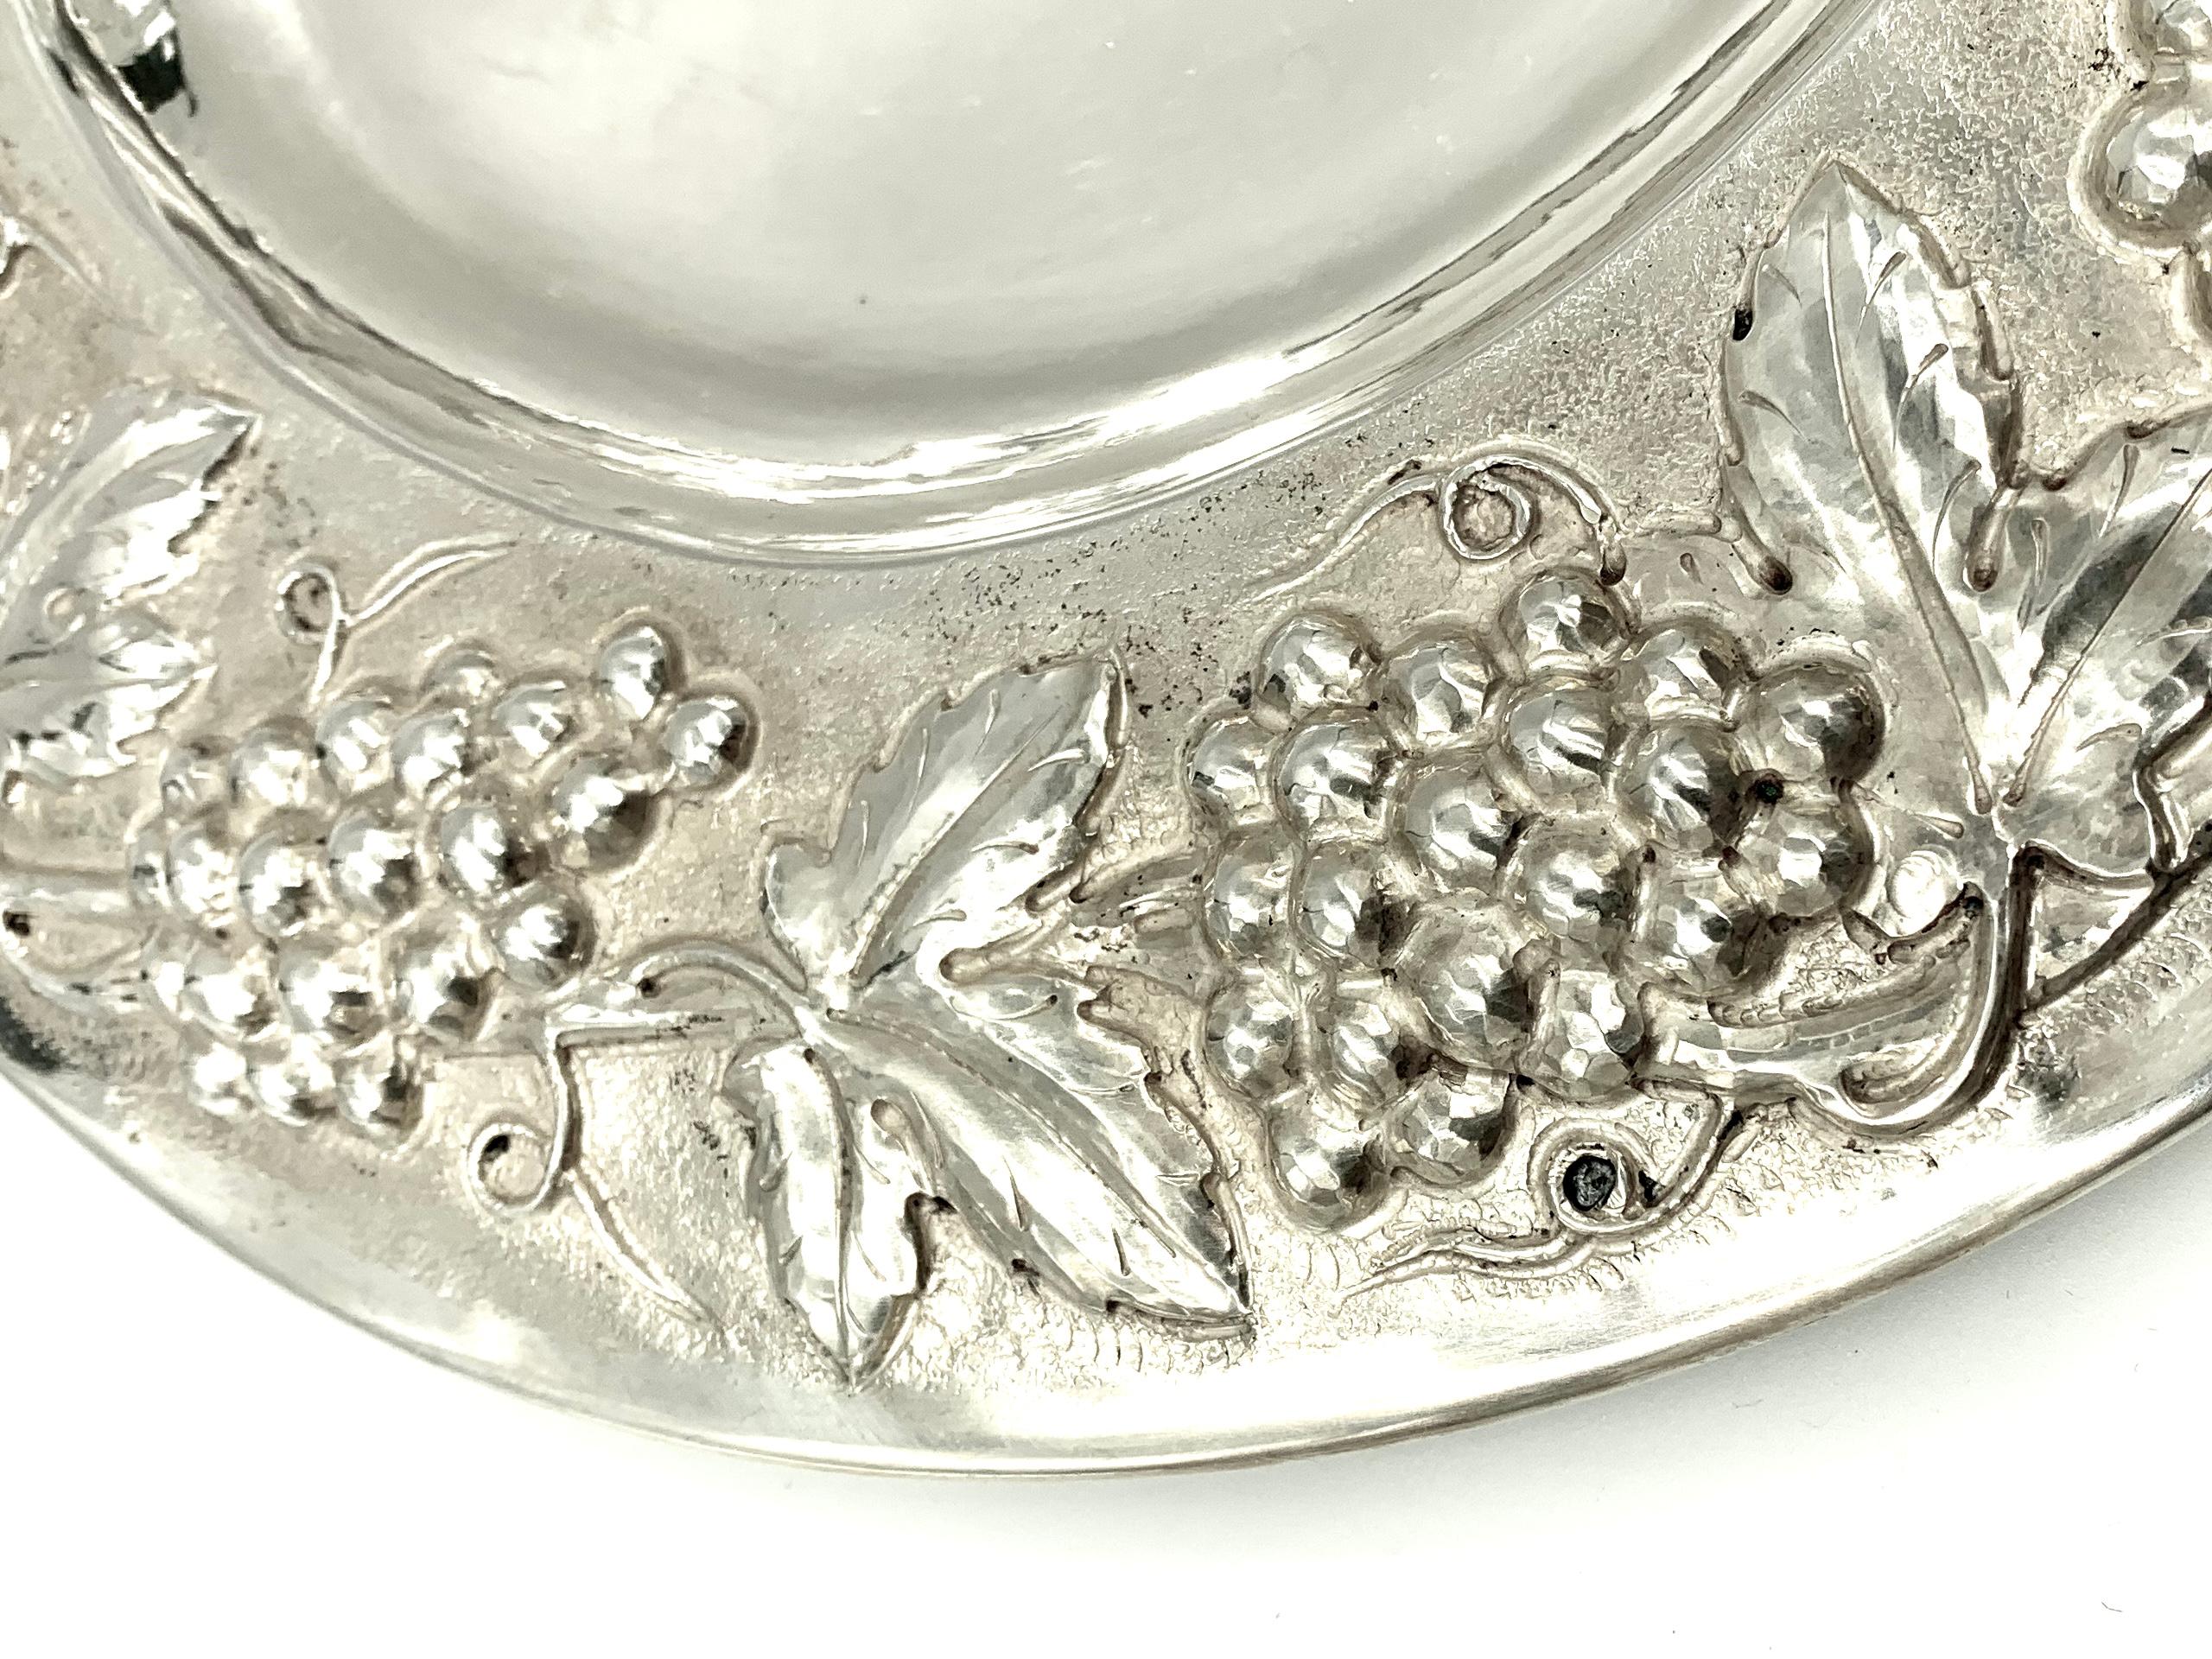 Large, substantial Italian mid-century hand chased grape motif 800 silver wine cooler with matching serving tray/underplate by Pietro Chinetti, Via Leonardo da Vinci 2, Milan(Gallarate), Varese, created between 1955-1971. Great modern interpretation